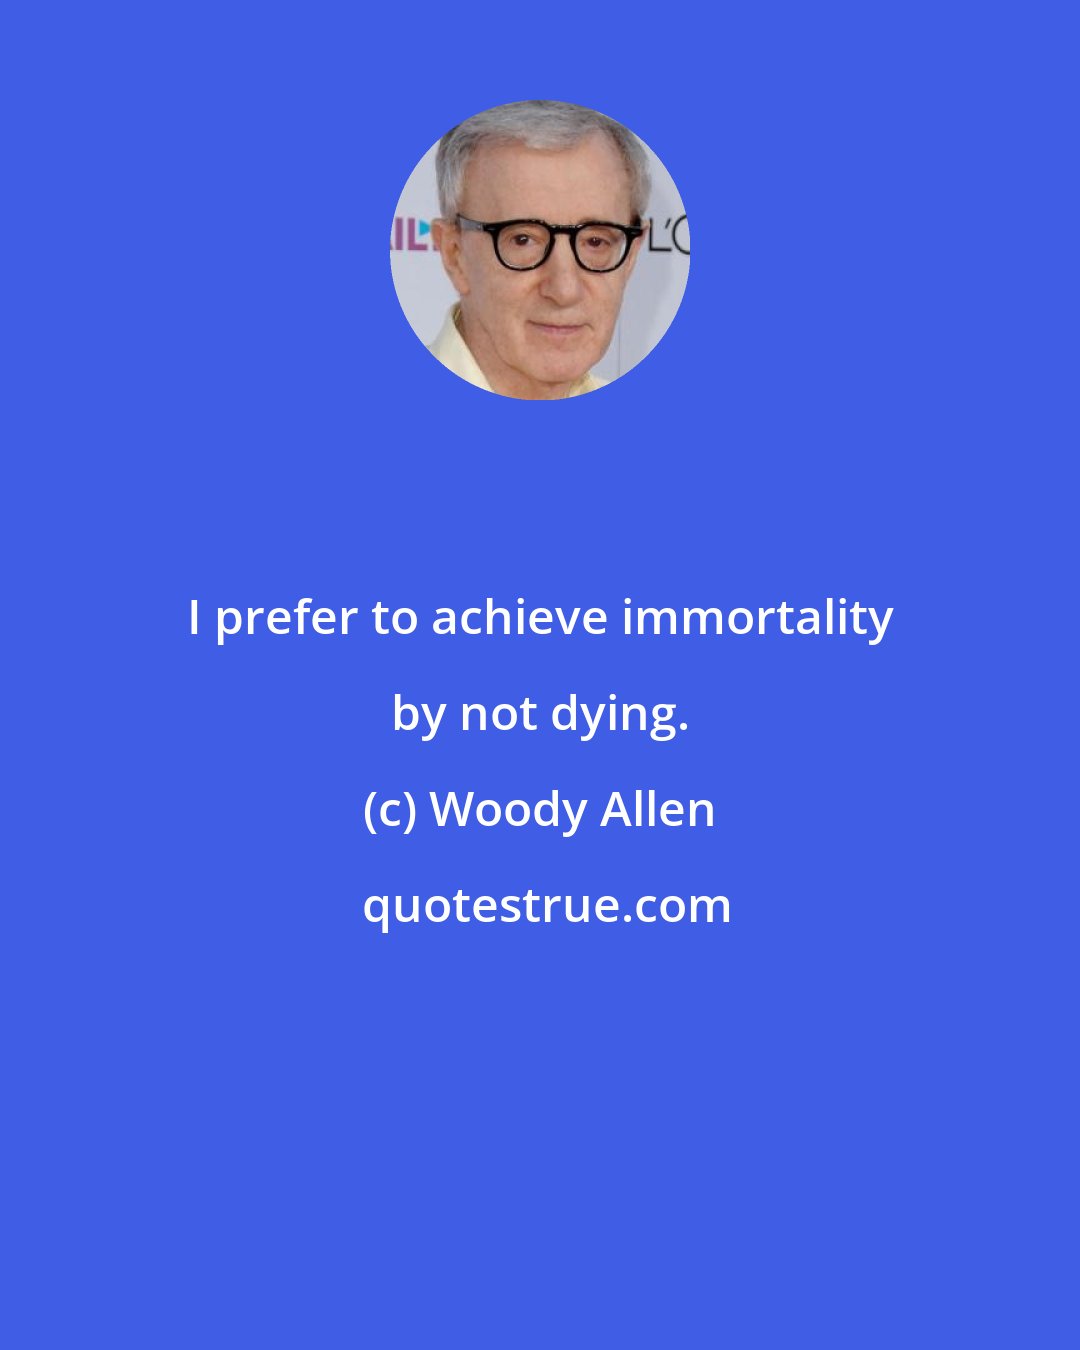 Woody Allen: I prefer to achieve immortality by not dying.